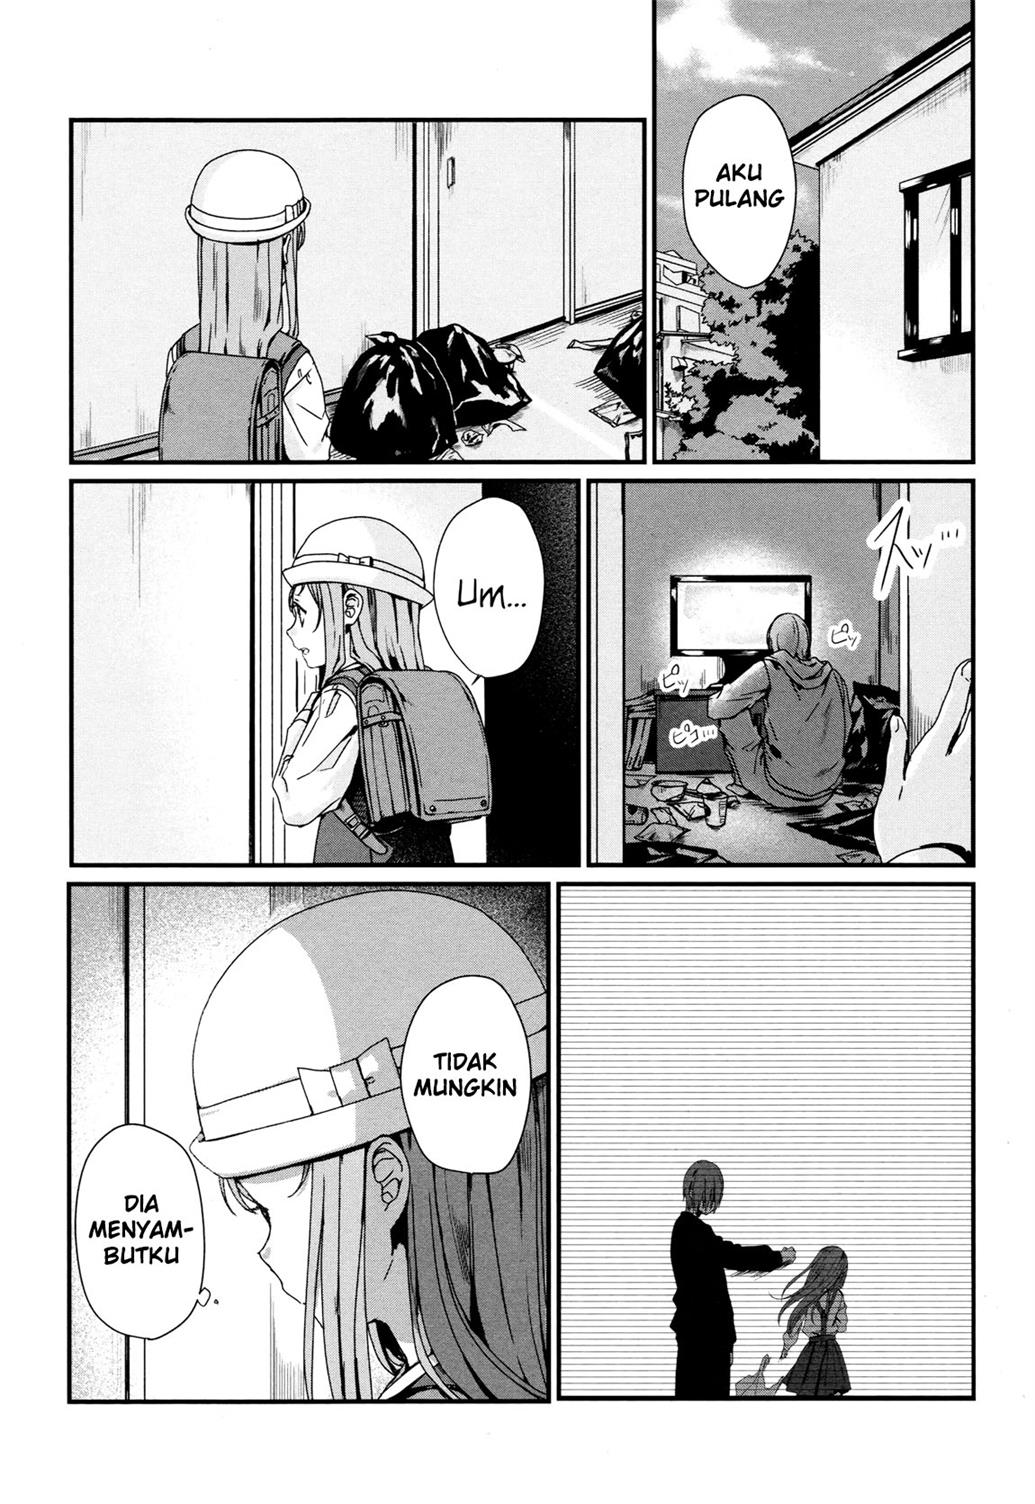 Rental Onii-chan Chapter 2